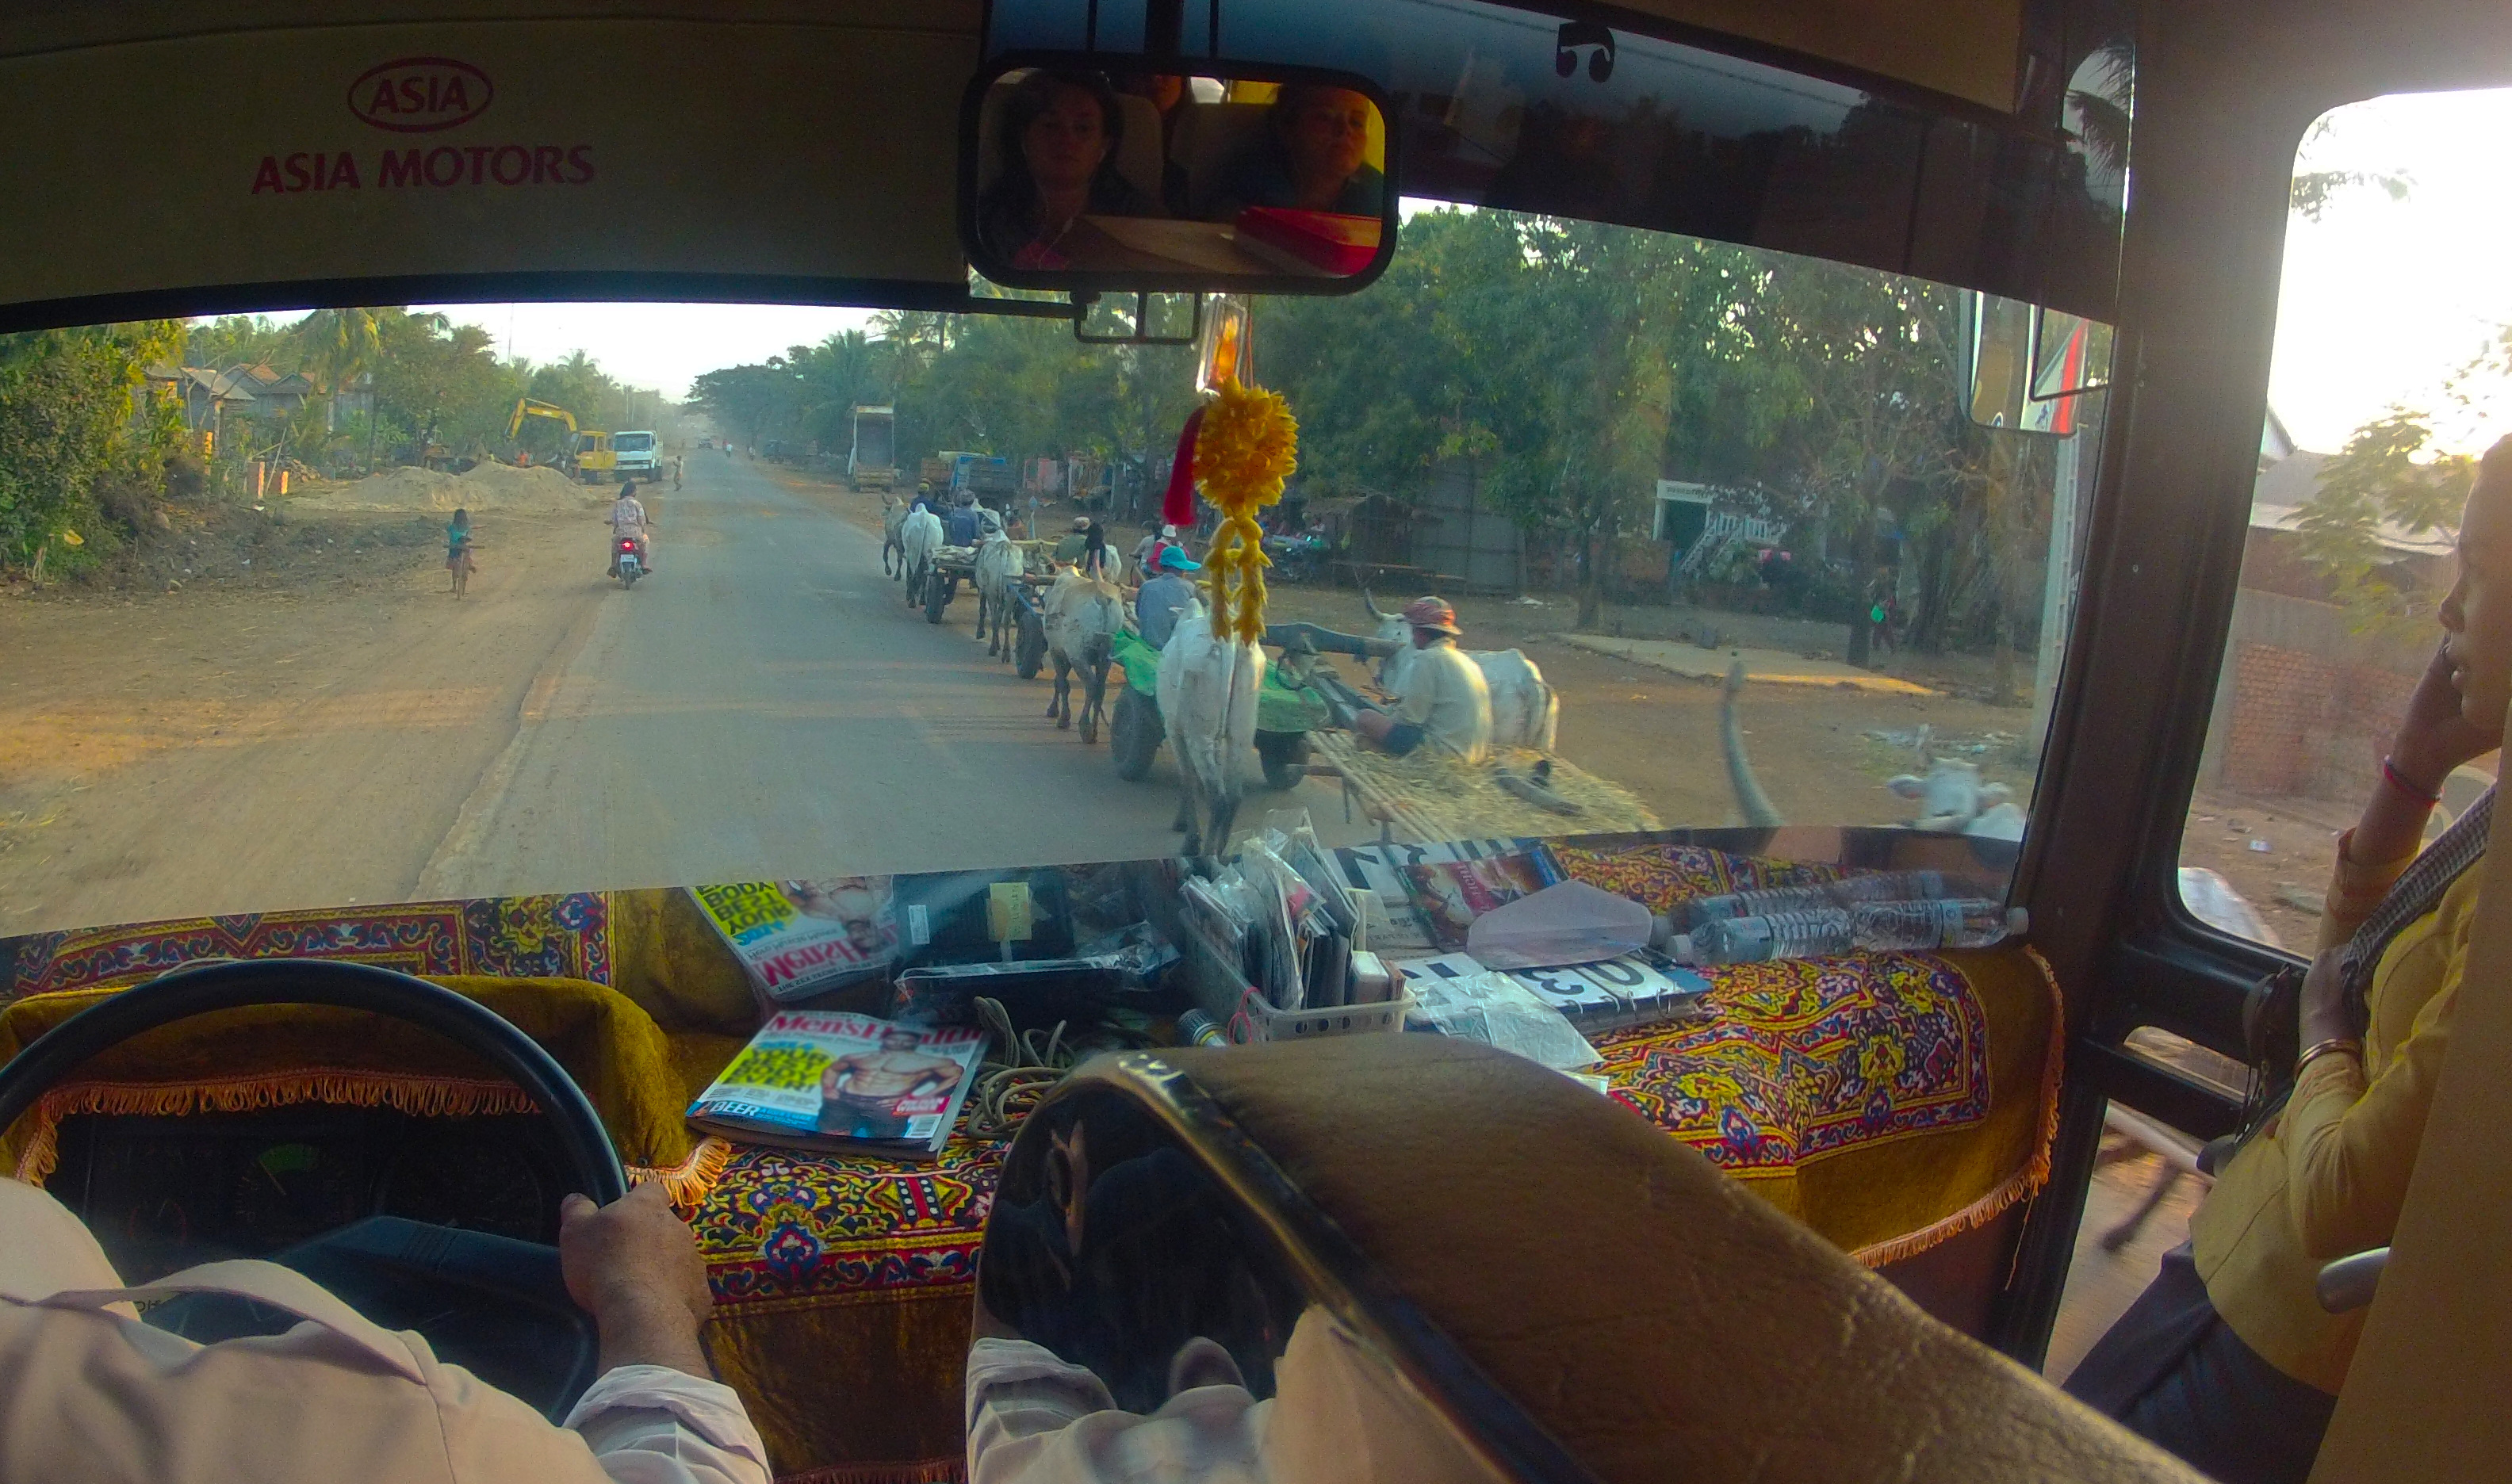 Many hours are spent travelling along bumby, uneven roads commonly referred as the "Cambodian Massage". As new highways are being constructed the driver has to share the roads with ox-driven caravans and motorbikes.